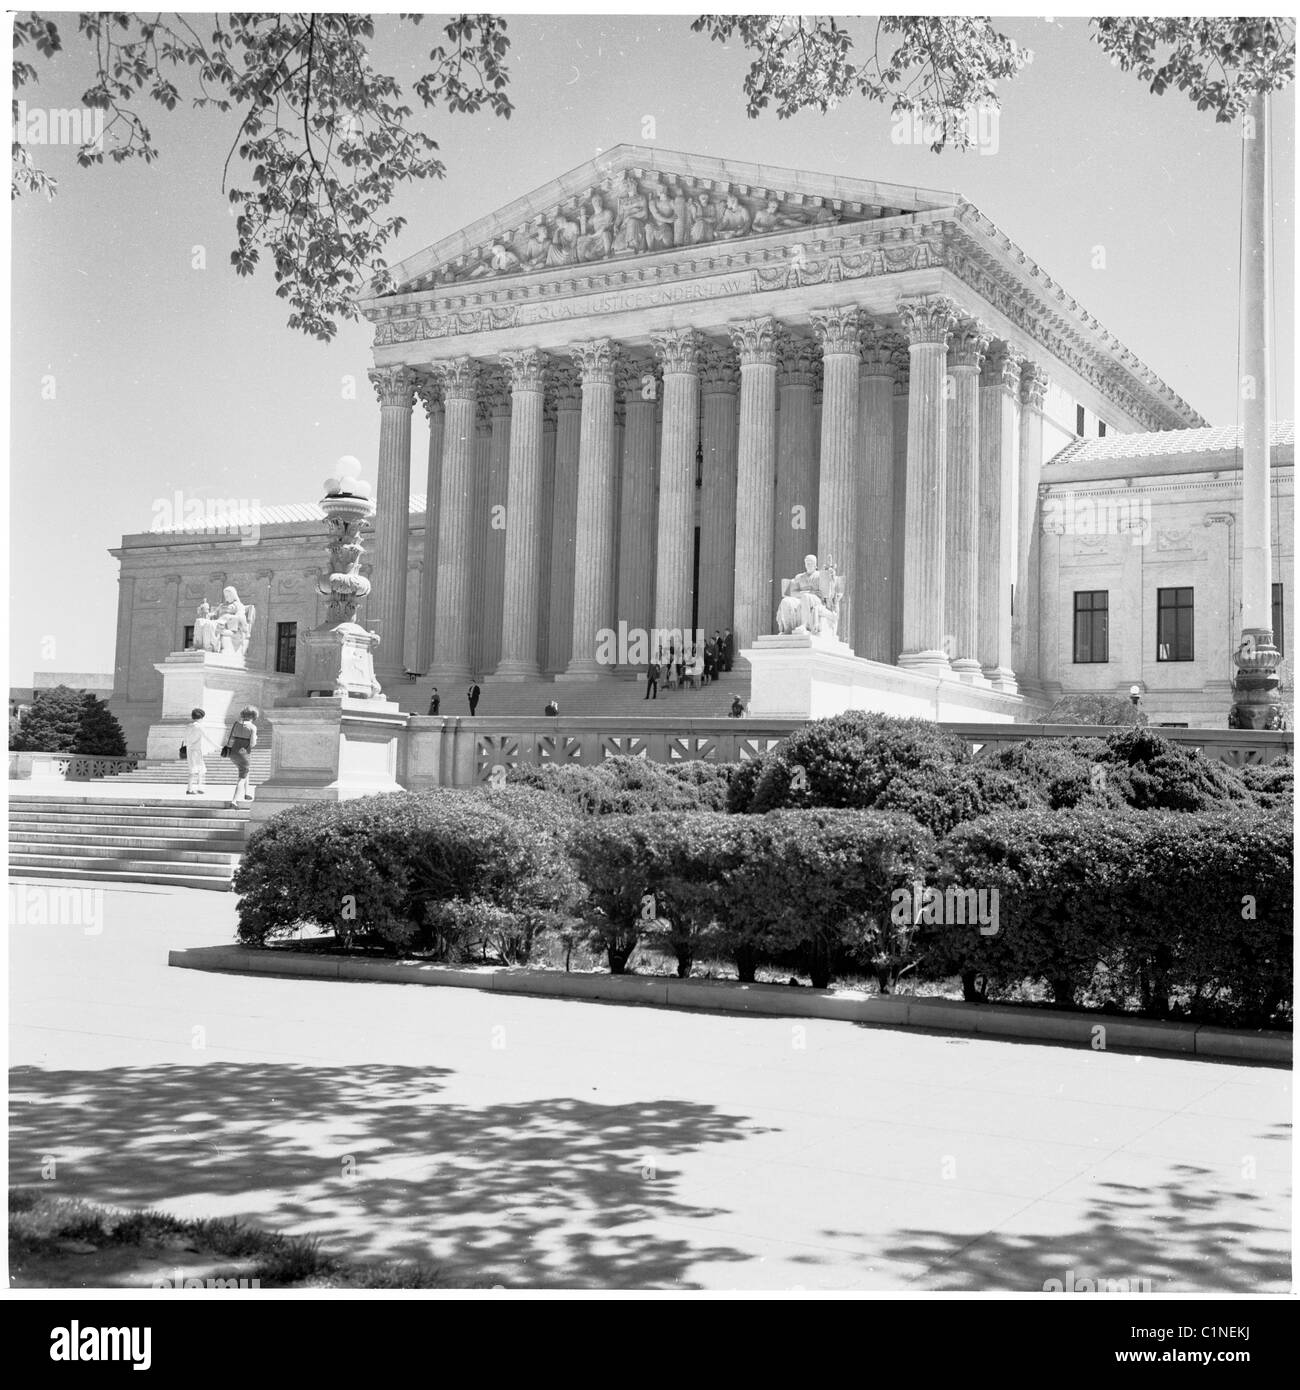 America, 1950s. Photograph by J Allan Cash of the exterior of the US Supreme Court building in Washington DC. Stock Photo